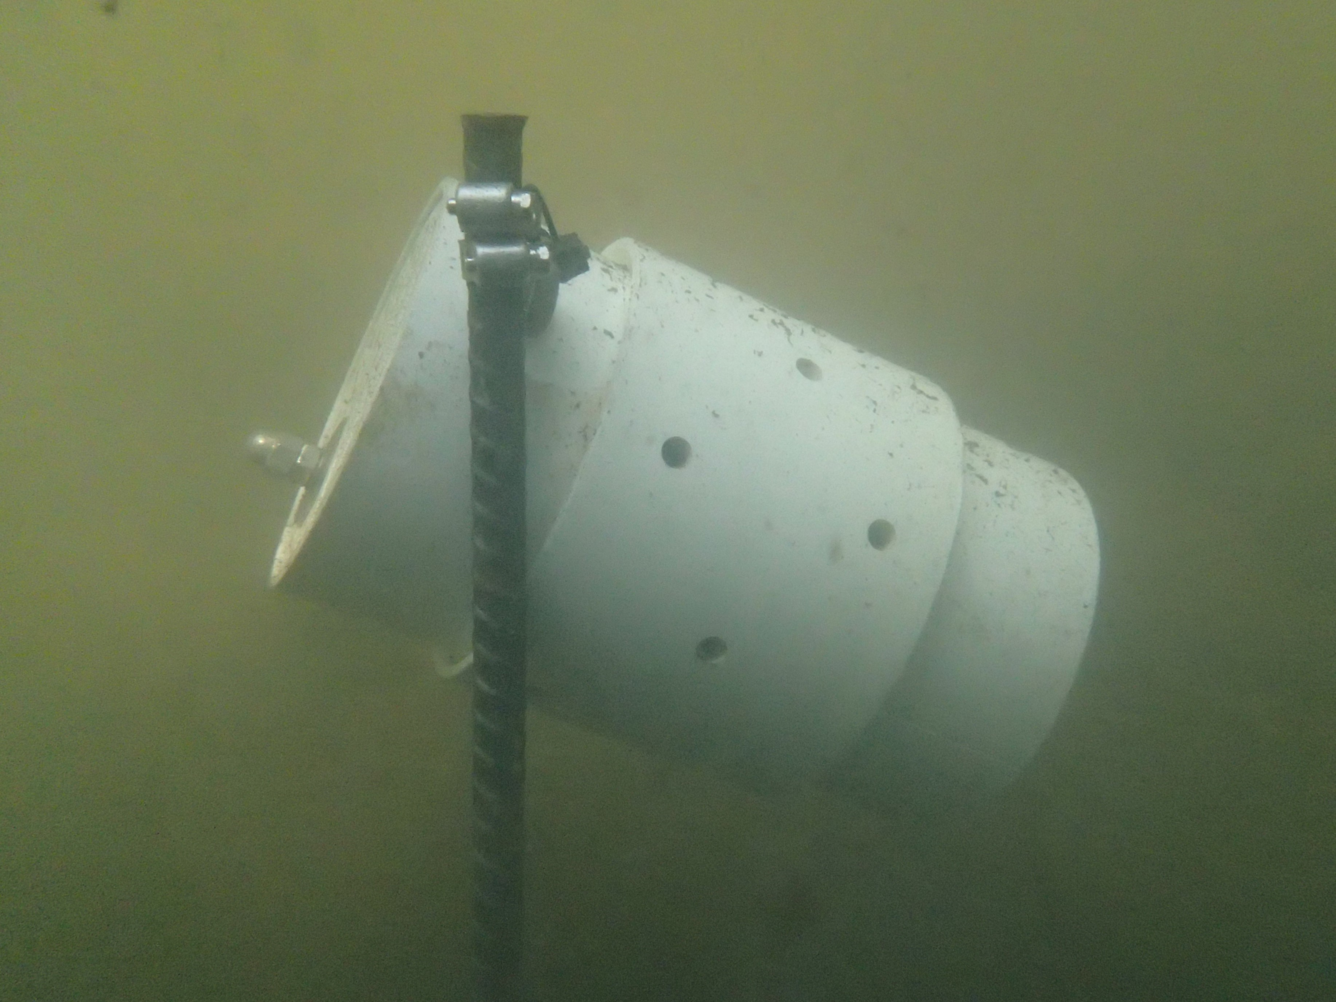 Underwater passive sampler attached to rebar stake in cloudy green water